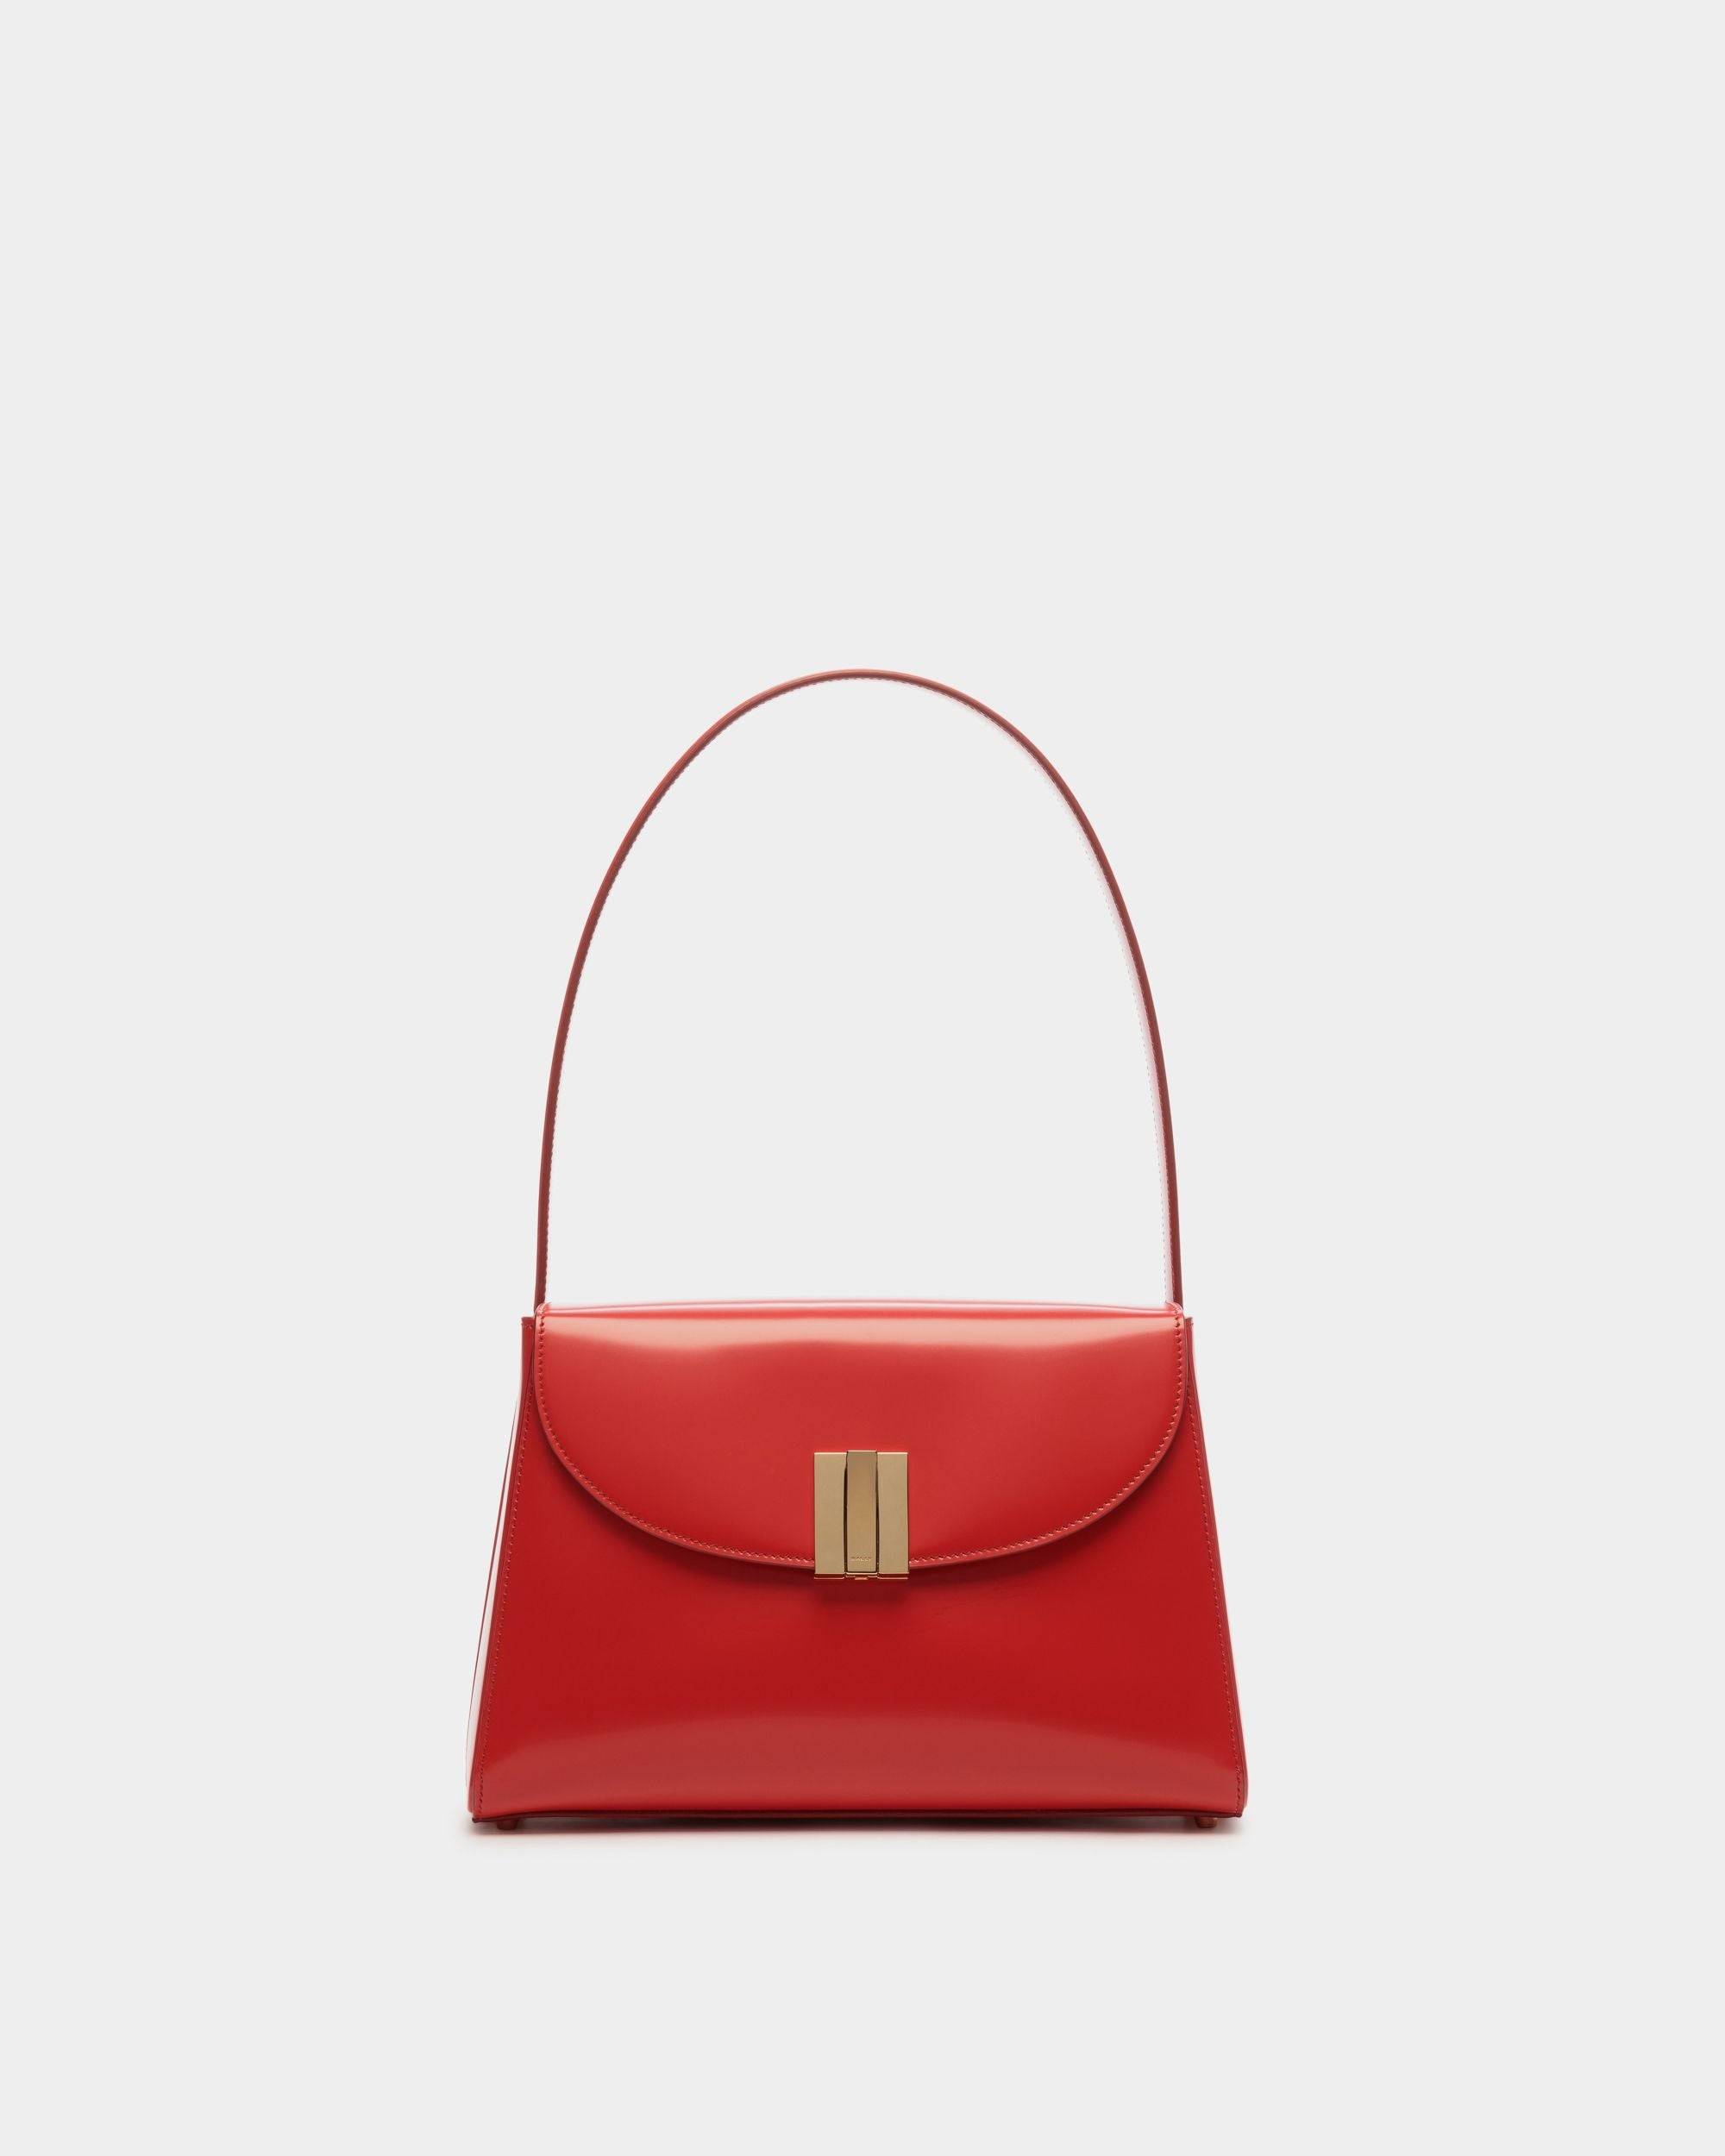 Ollam | Women's Shoulder Bag in Candy Red Brushed Leather | Bally | Still Life Front